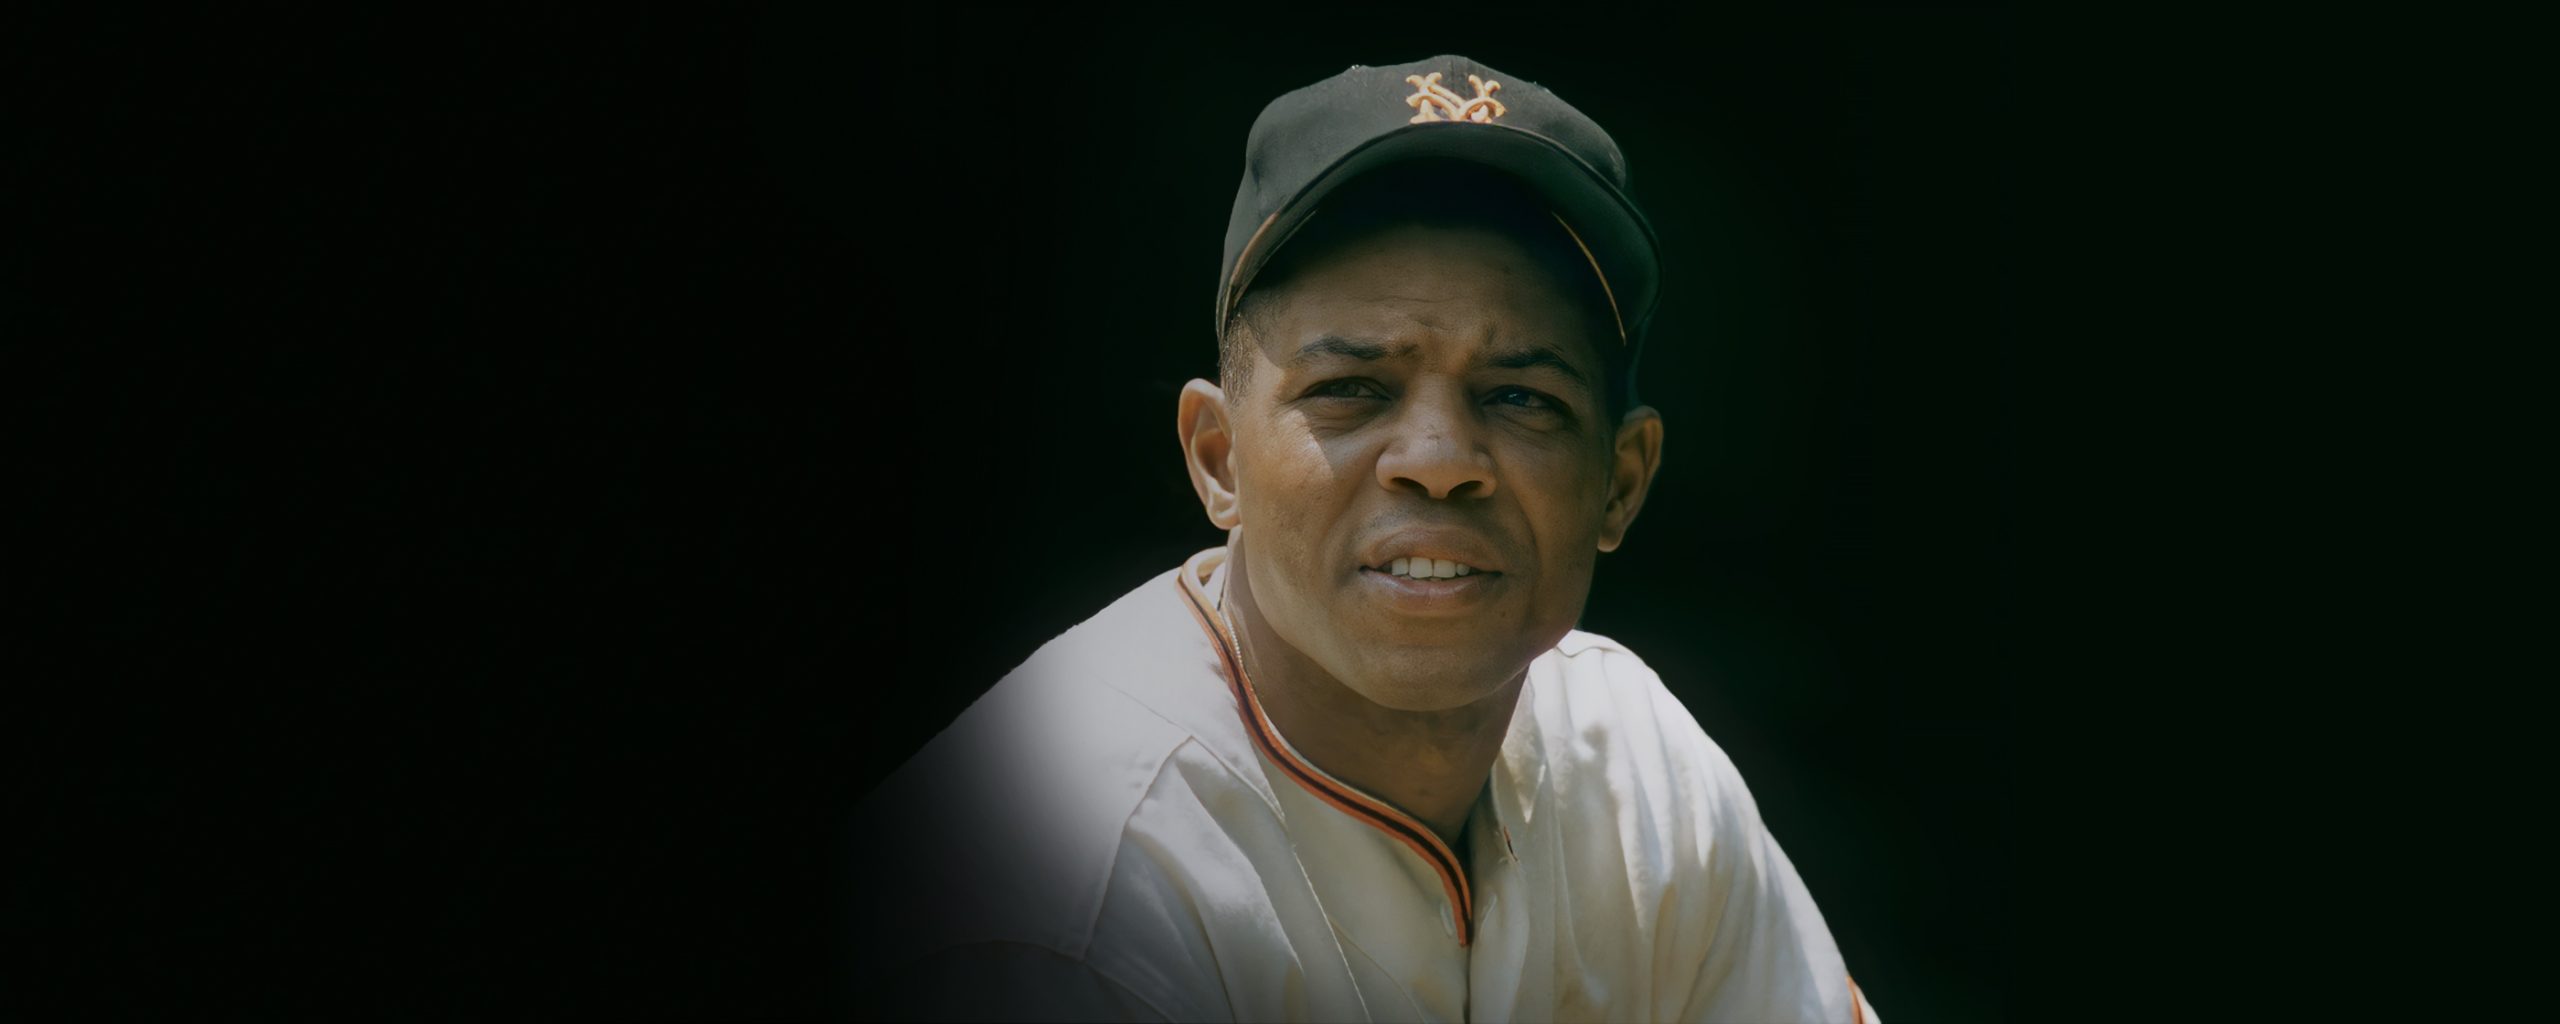 Willie Mays Baseball Hall of Famer Making a Spectacular Catch 